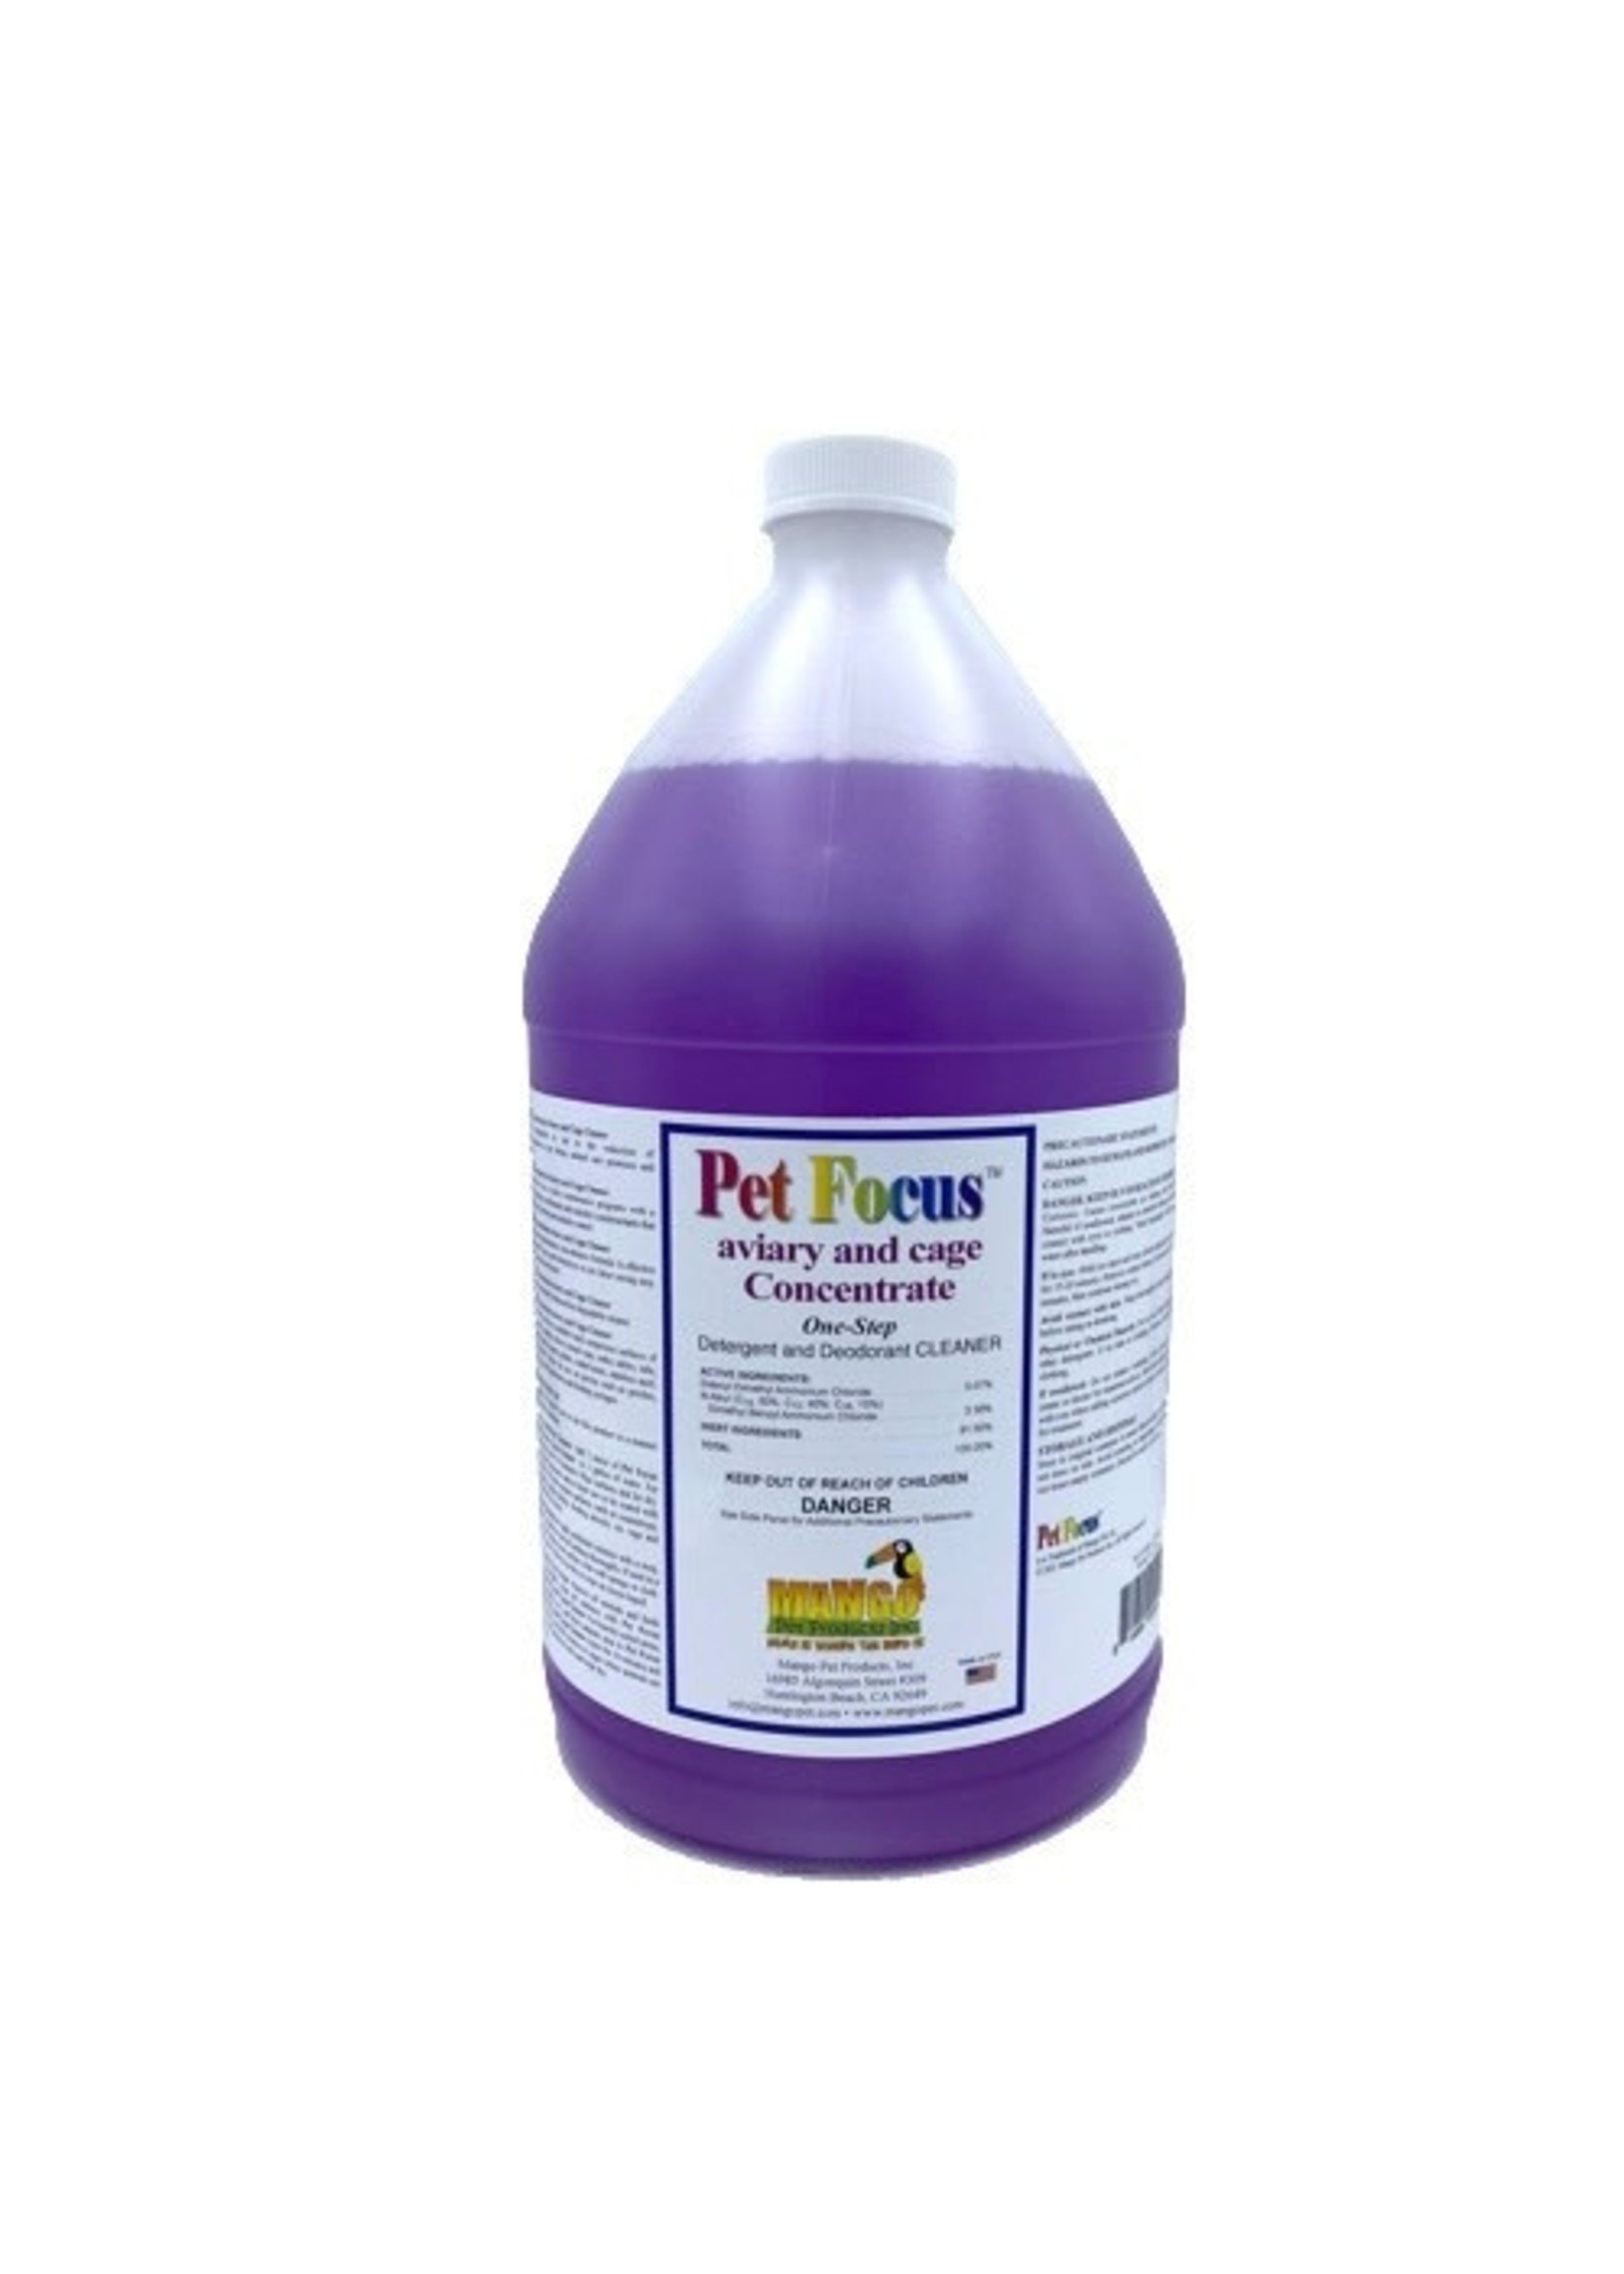 Pet Focus  Aviary  cage Concentrate (1 gallon)